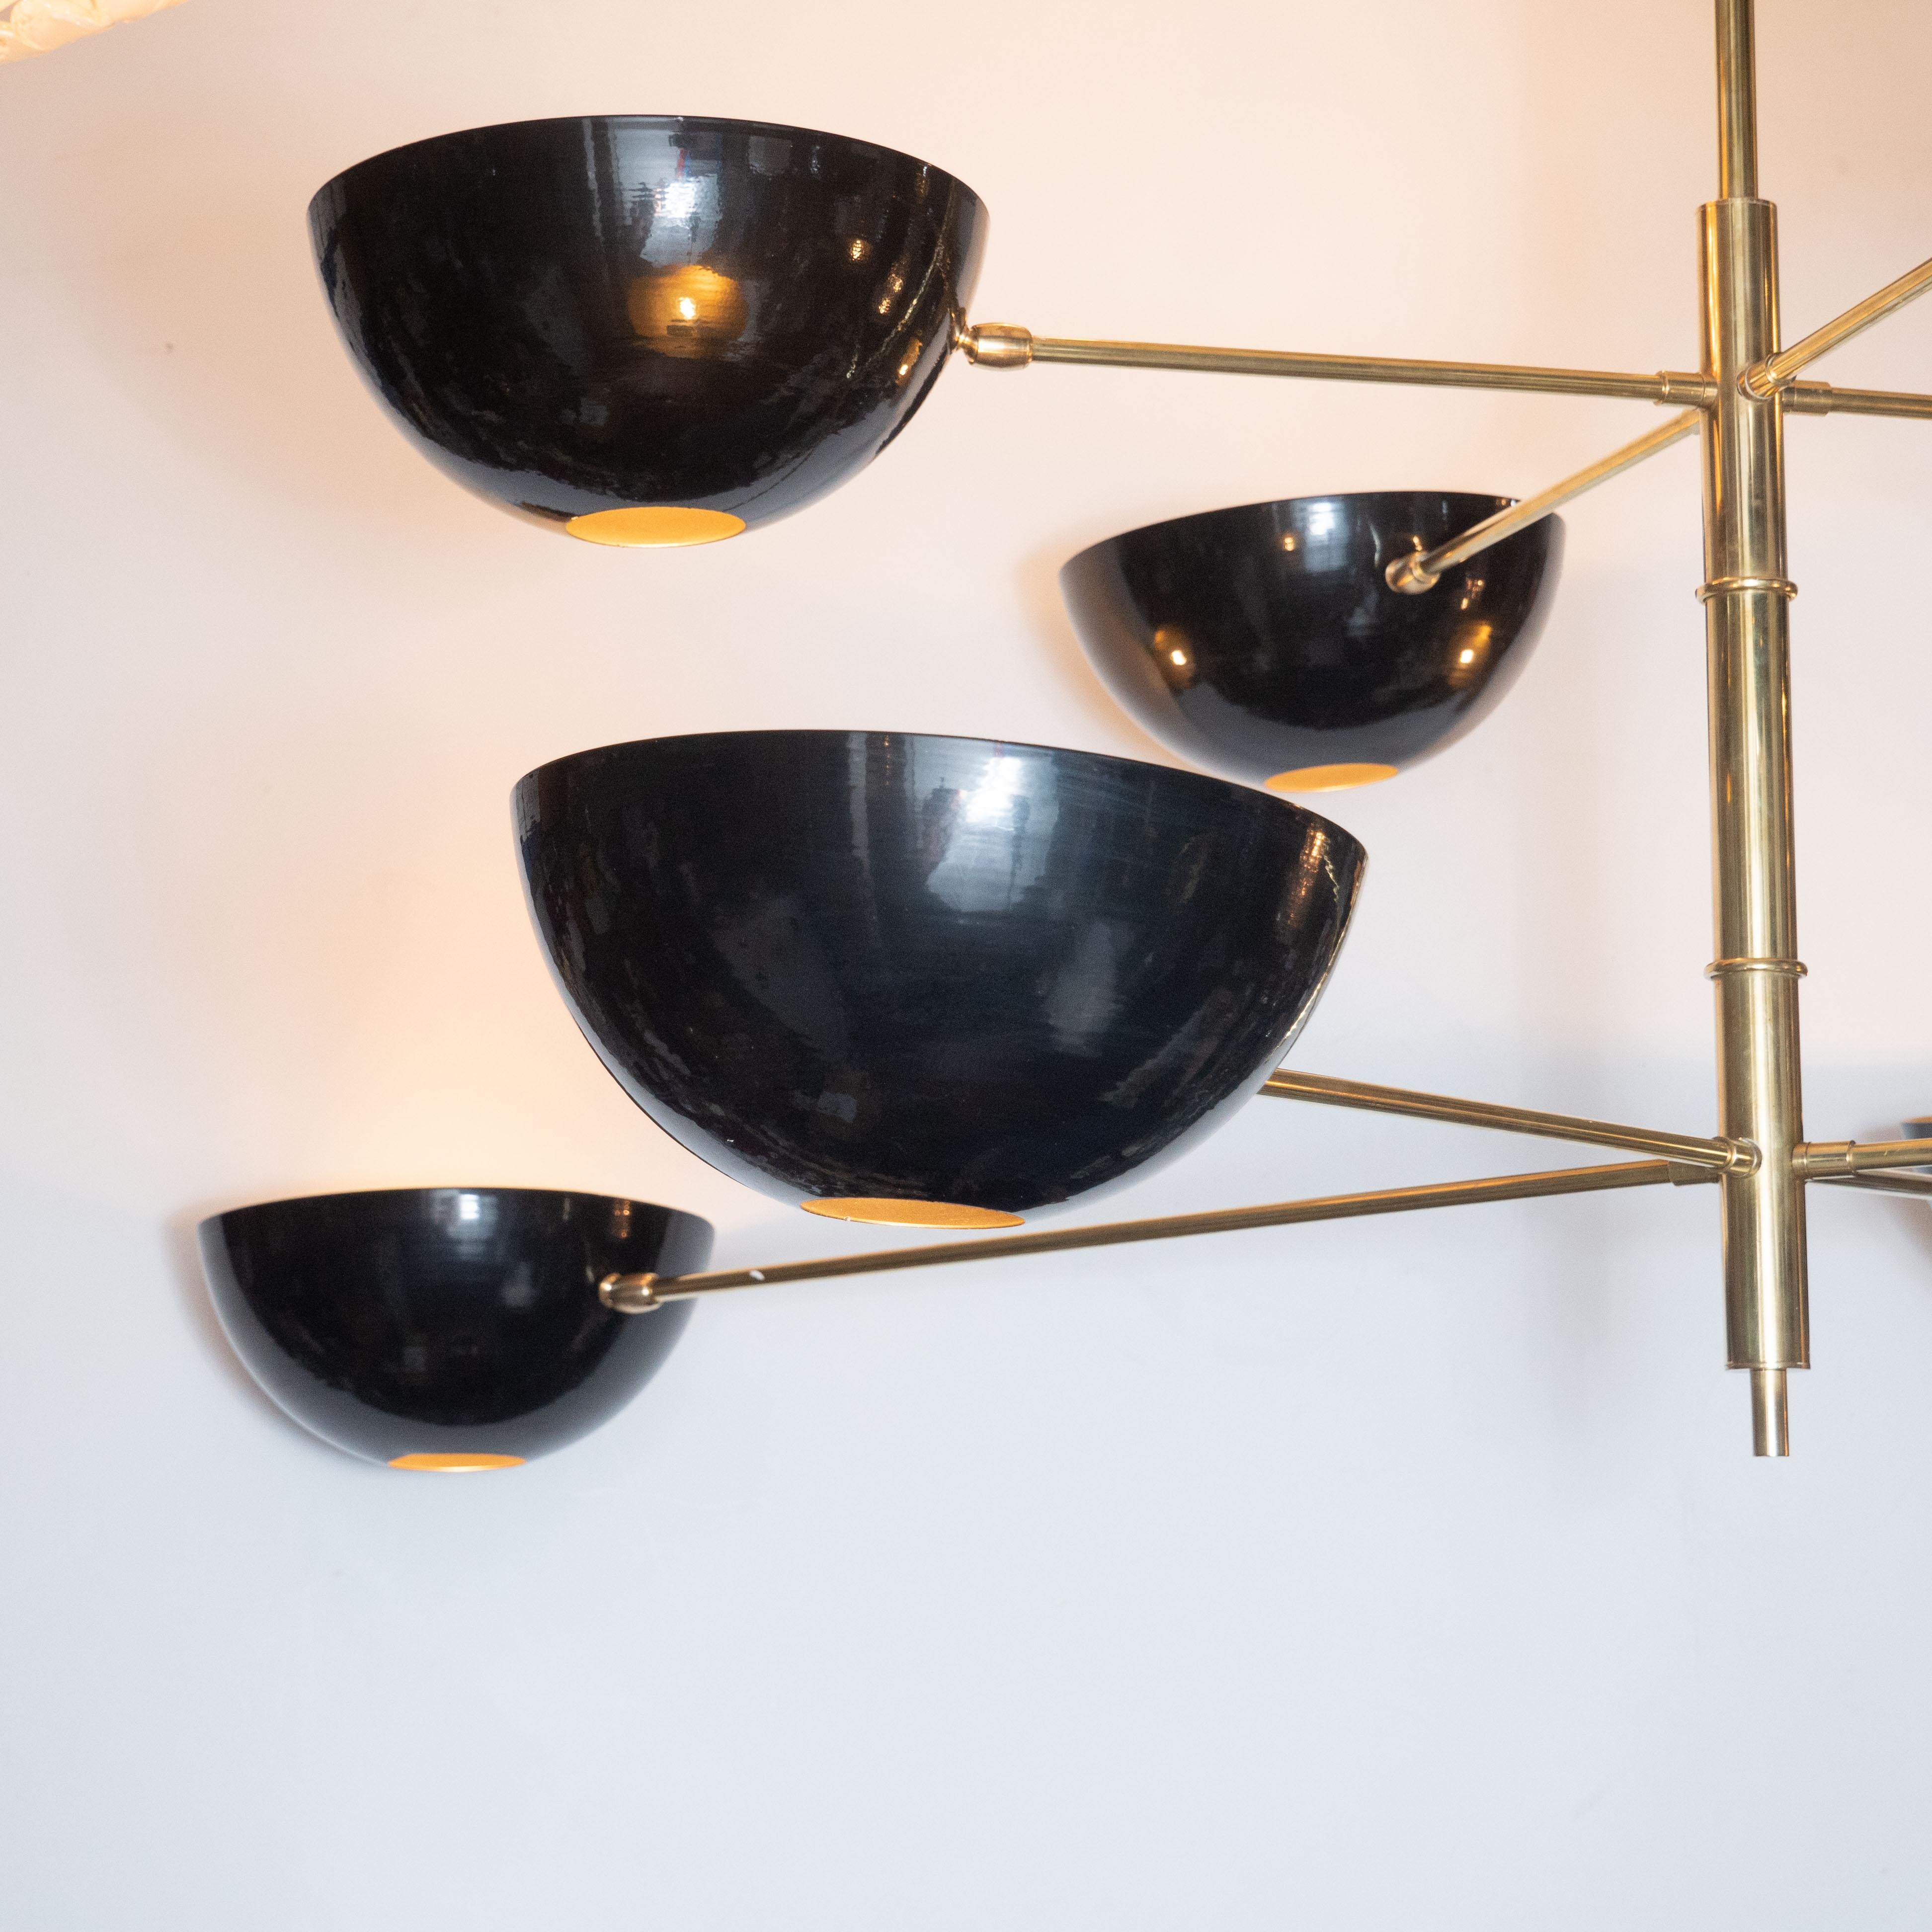 This stunning modernist eight-arm Stilnovo style chandelier was designed and created in Italy by High Style Deco. It features two sets of four brass arms that cross the cylindrical body in an x-form. Each of the arms culminate in a convex domed